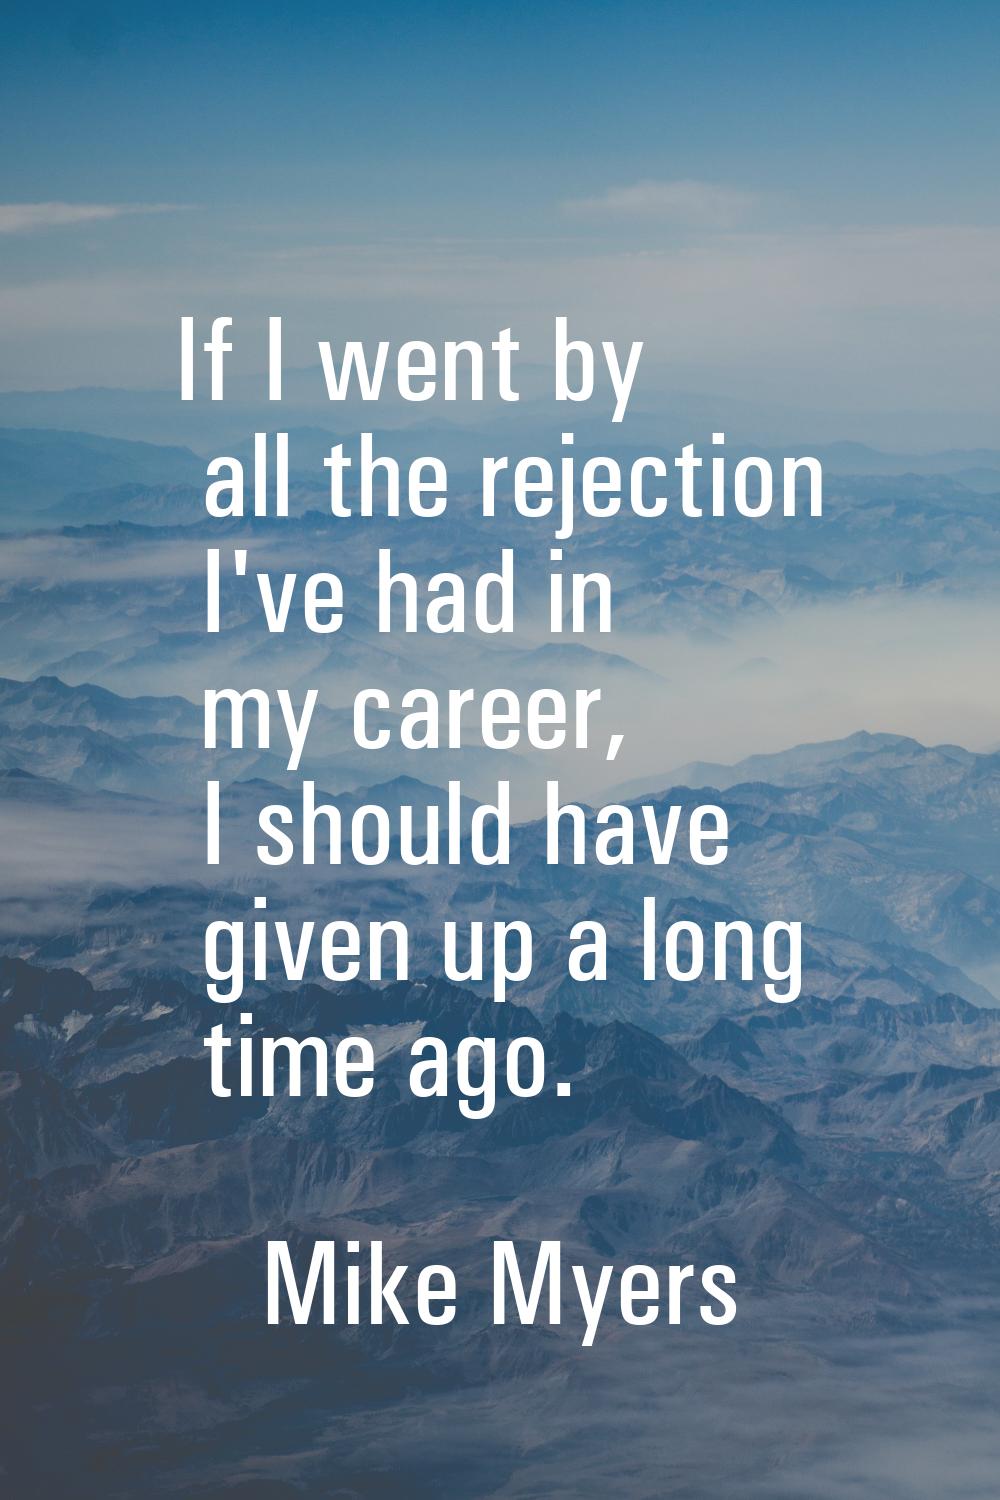 If I went by all the rejection I've had in my career, I should have given up a long time ago.